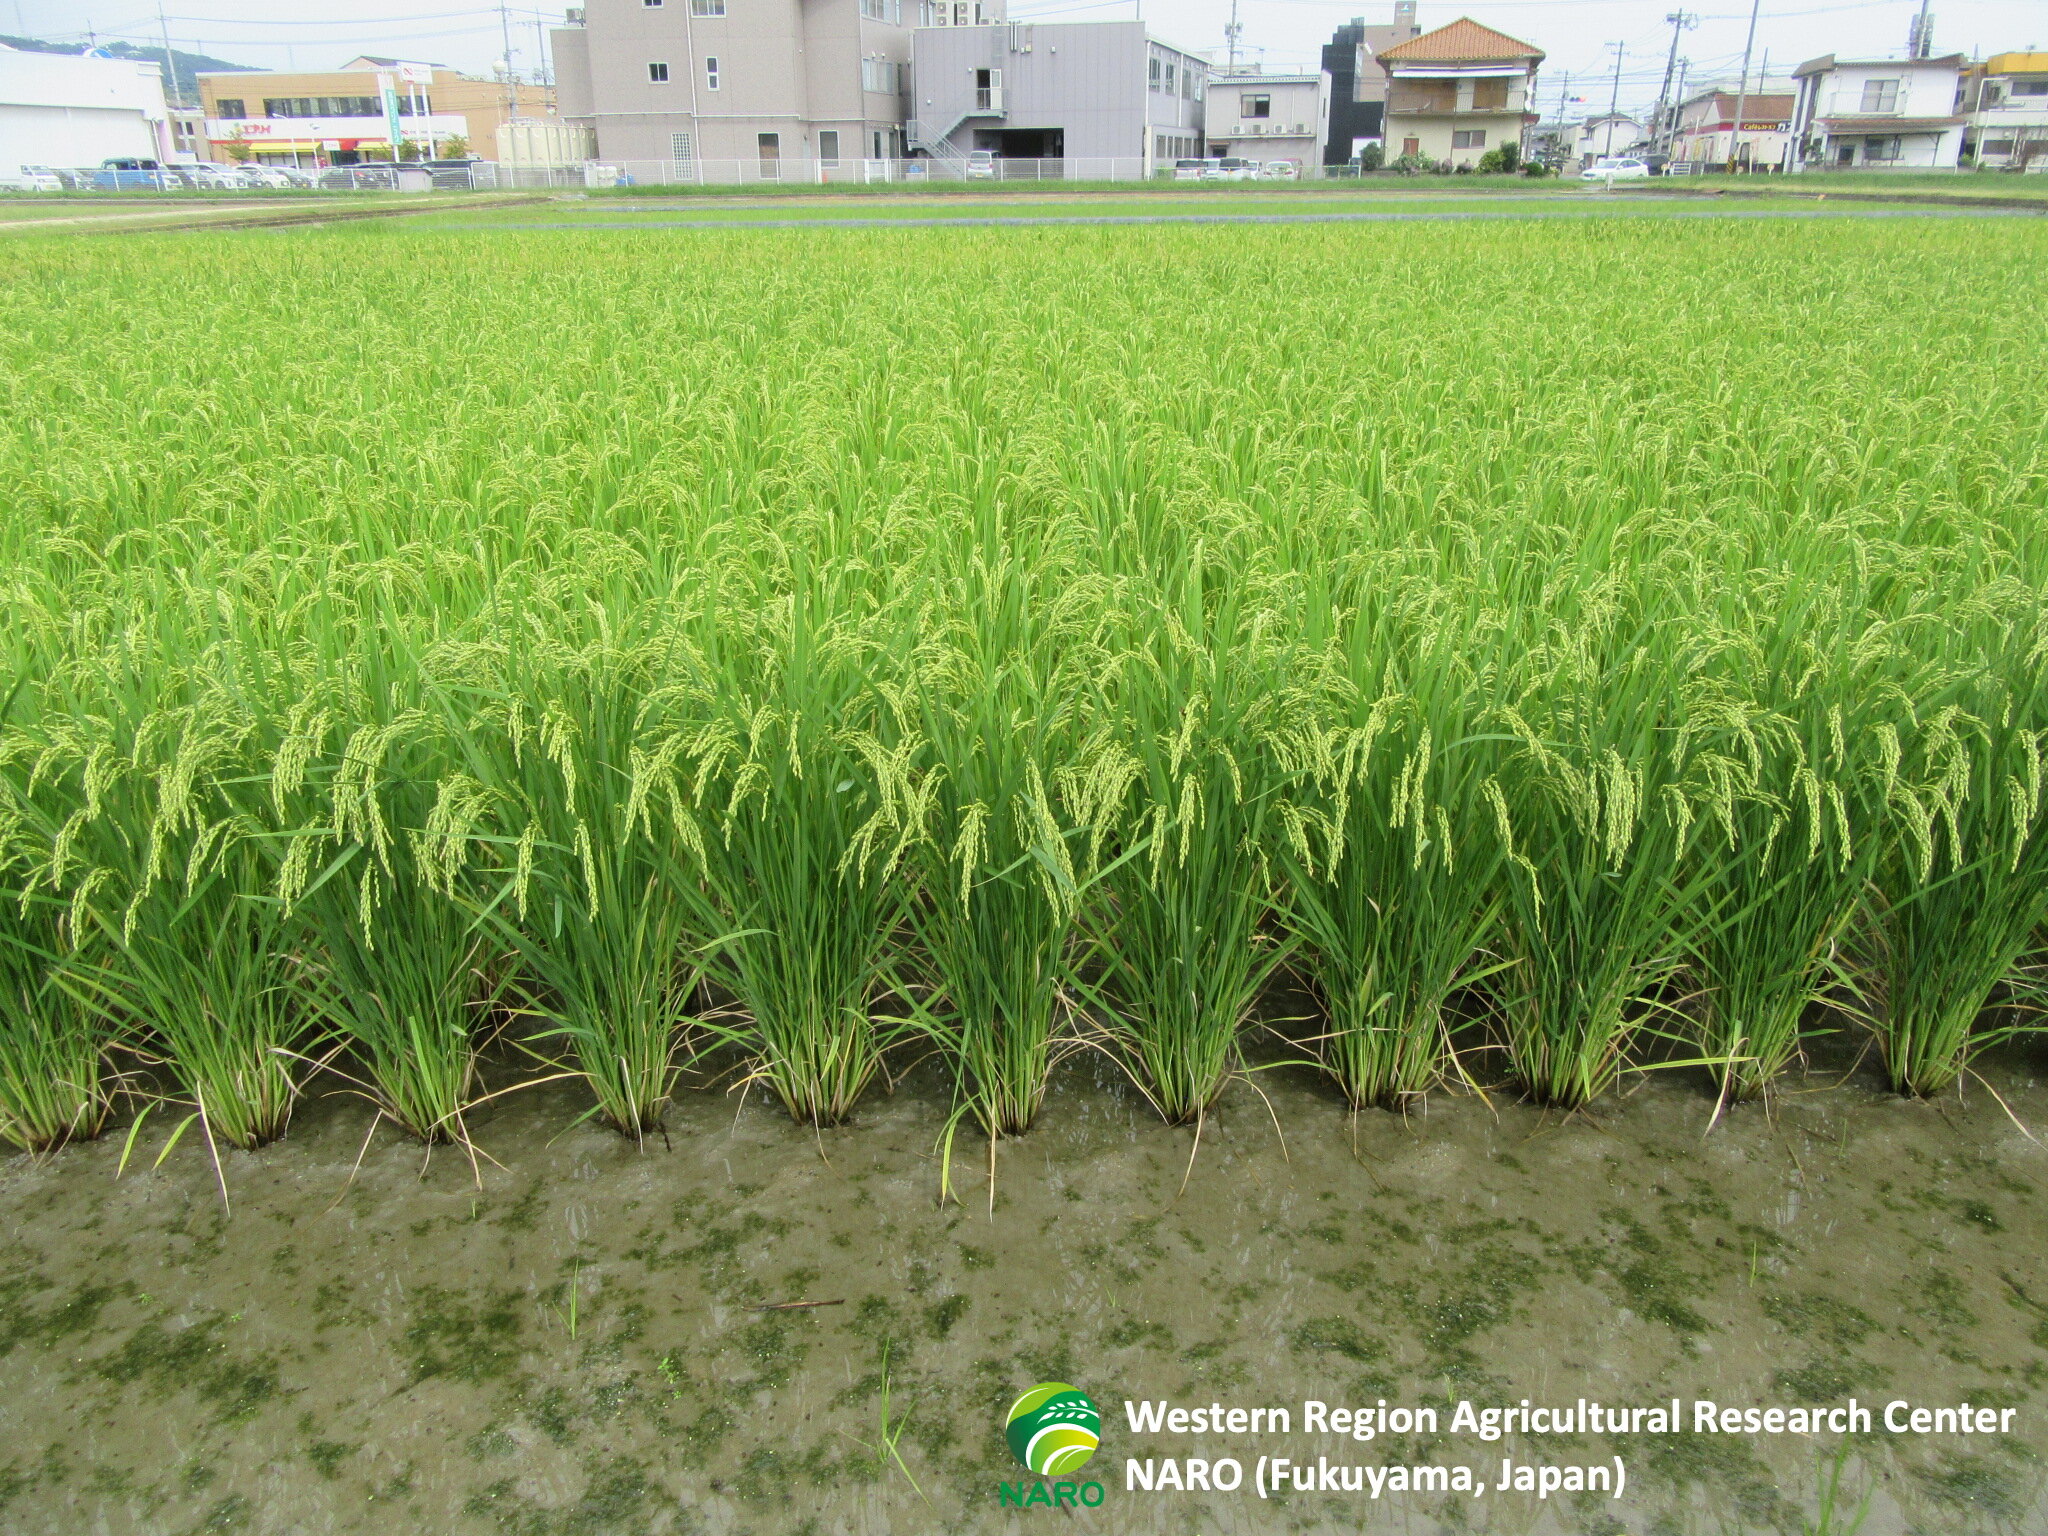 JAPAN (SEPT / South) “Rice in the field in Fukuyama. Harvest of rice will be next month and then we will sow wheat seeds at the end of November.”